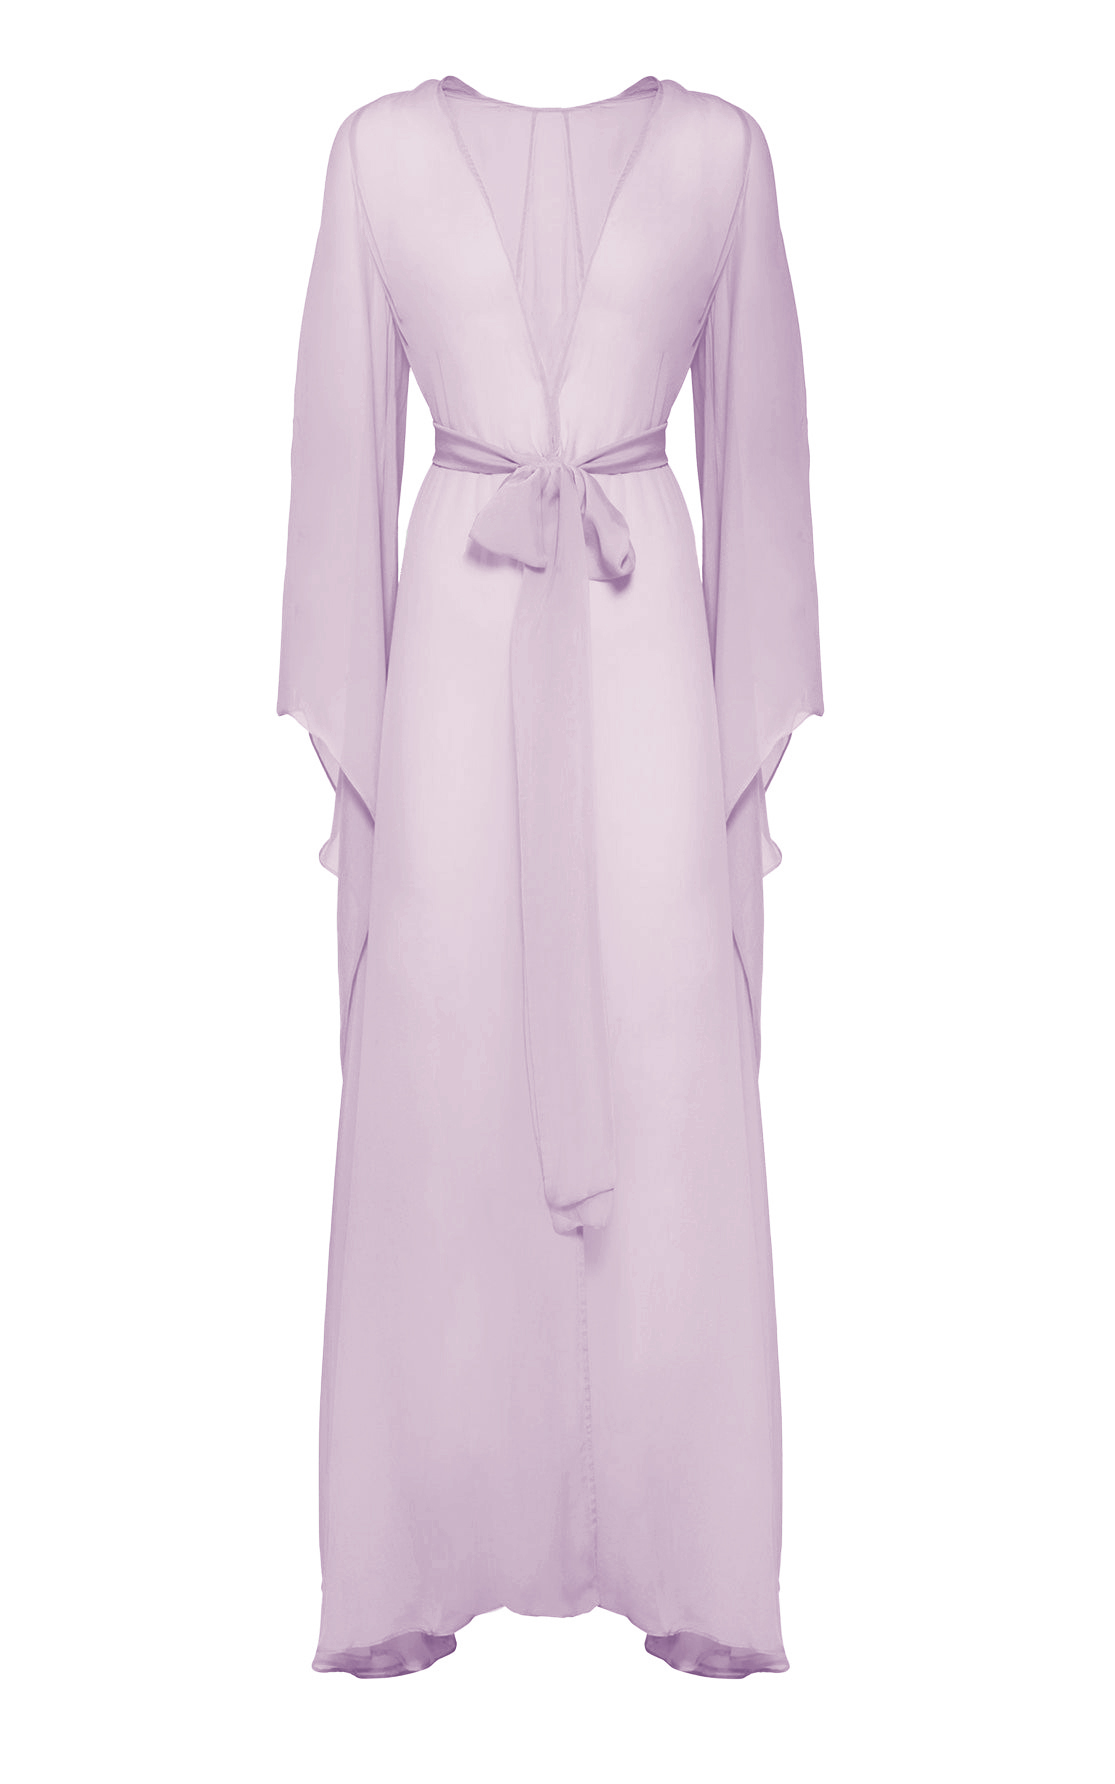 ROBE-2-lilac-FRONT